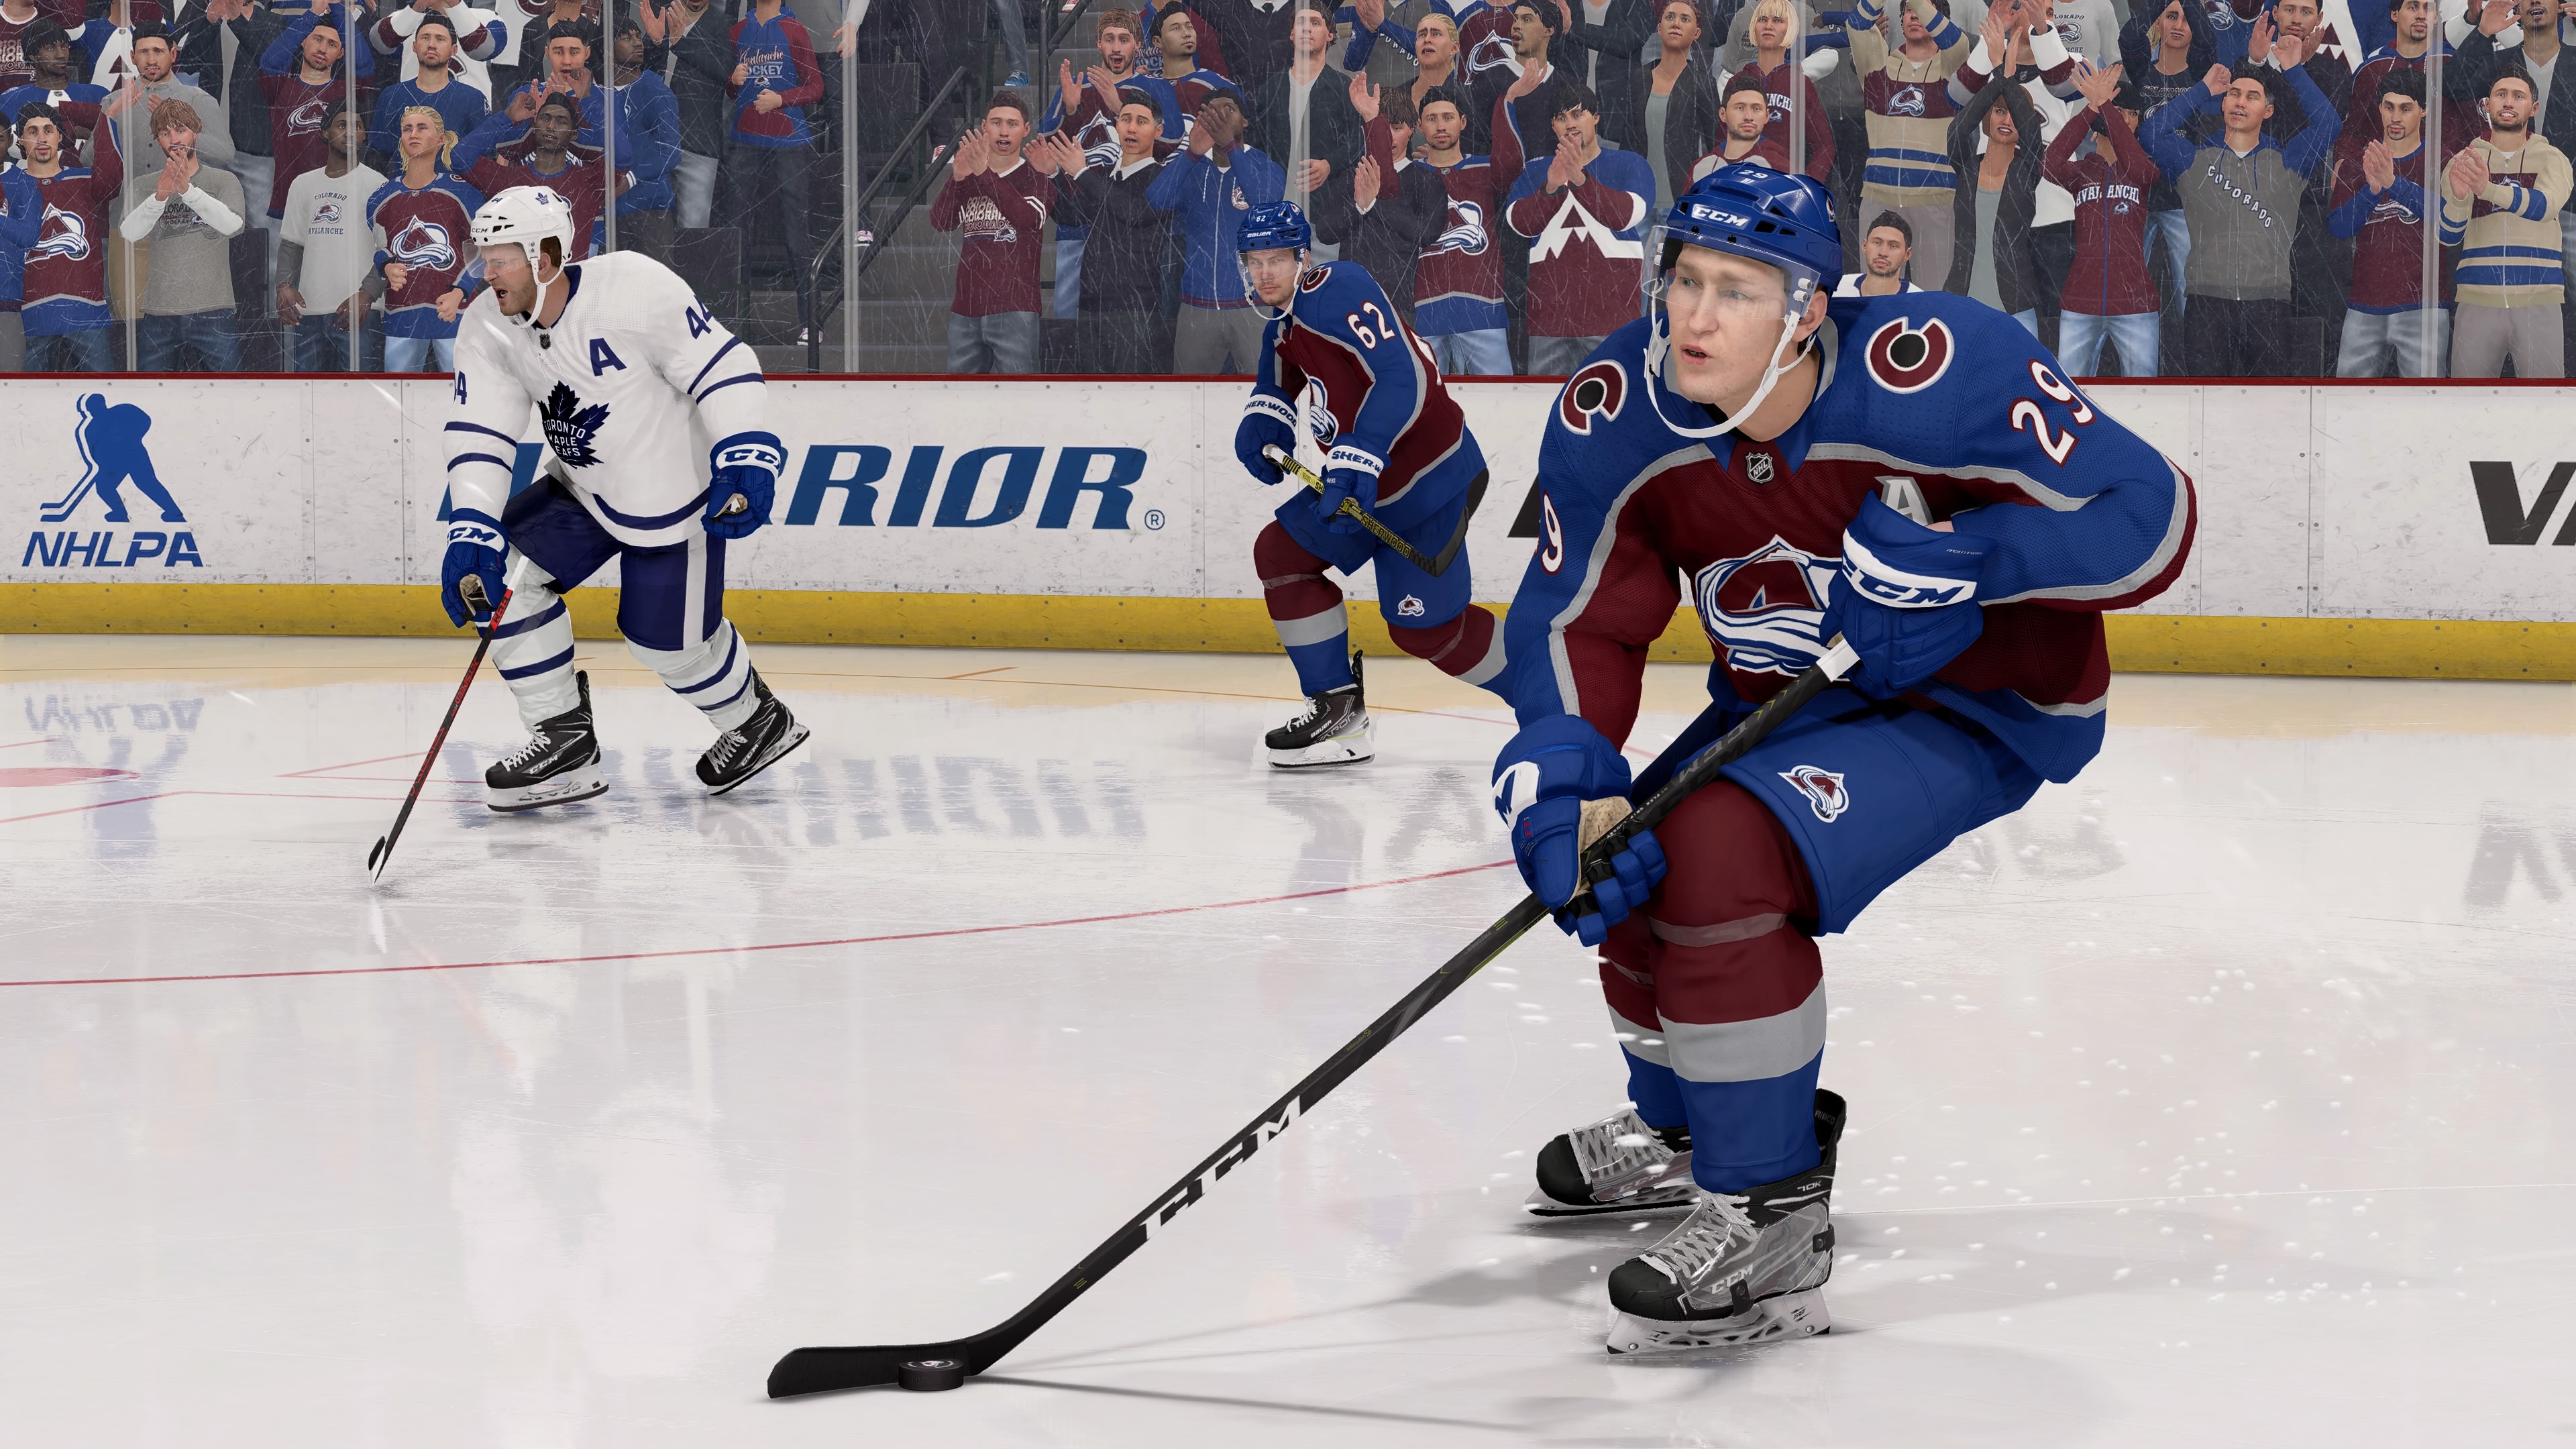 NHL 23 joins Xbox Game Pass Ultimate via EA Play today